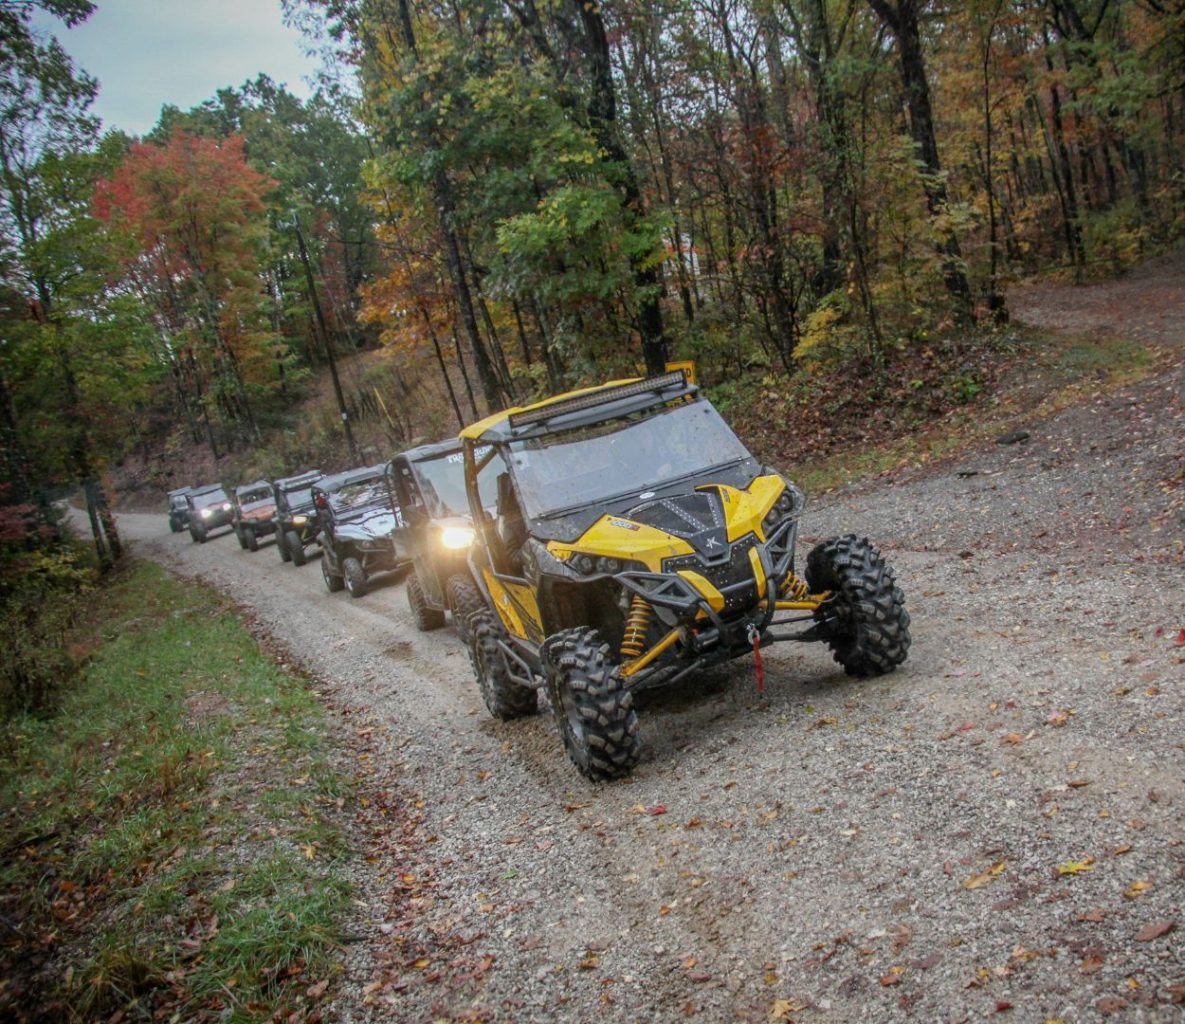 The Best UTV Trails in the US for Fall Adventures